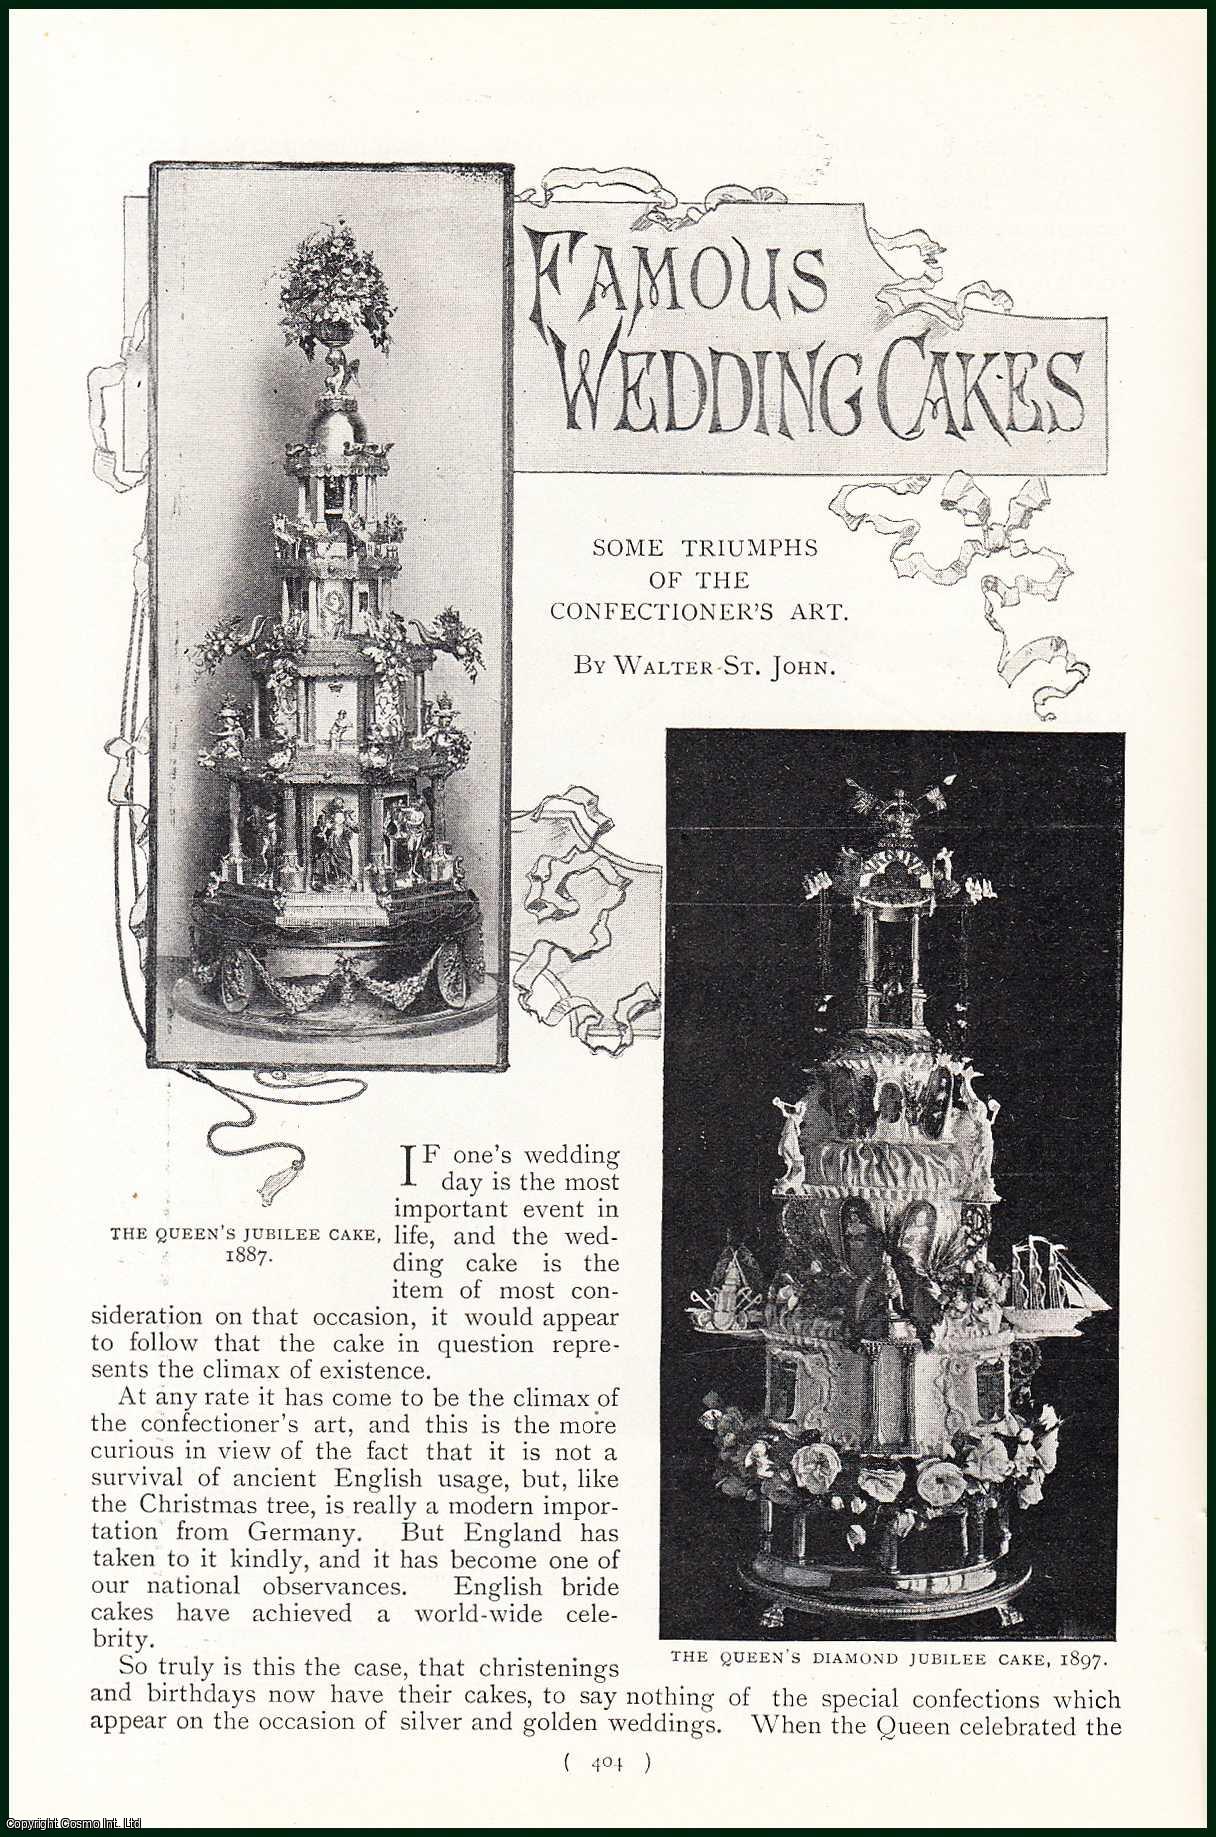 Walter St. John - Famous Wedding Cakes. Some Triumphs of the Confectioner's Art. An uncommon original article from the Harmsworth London Magazine, 1900.